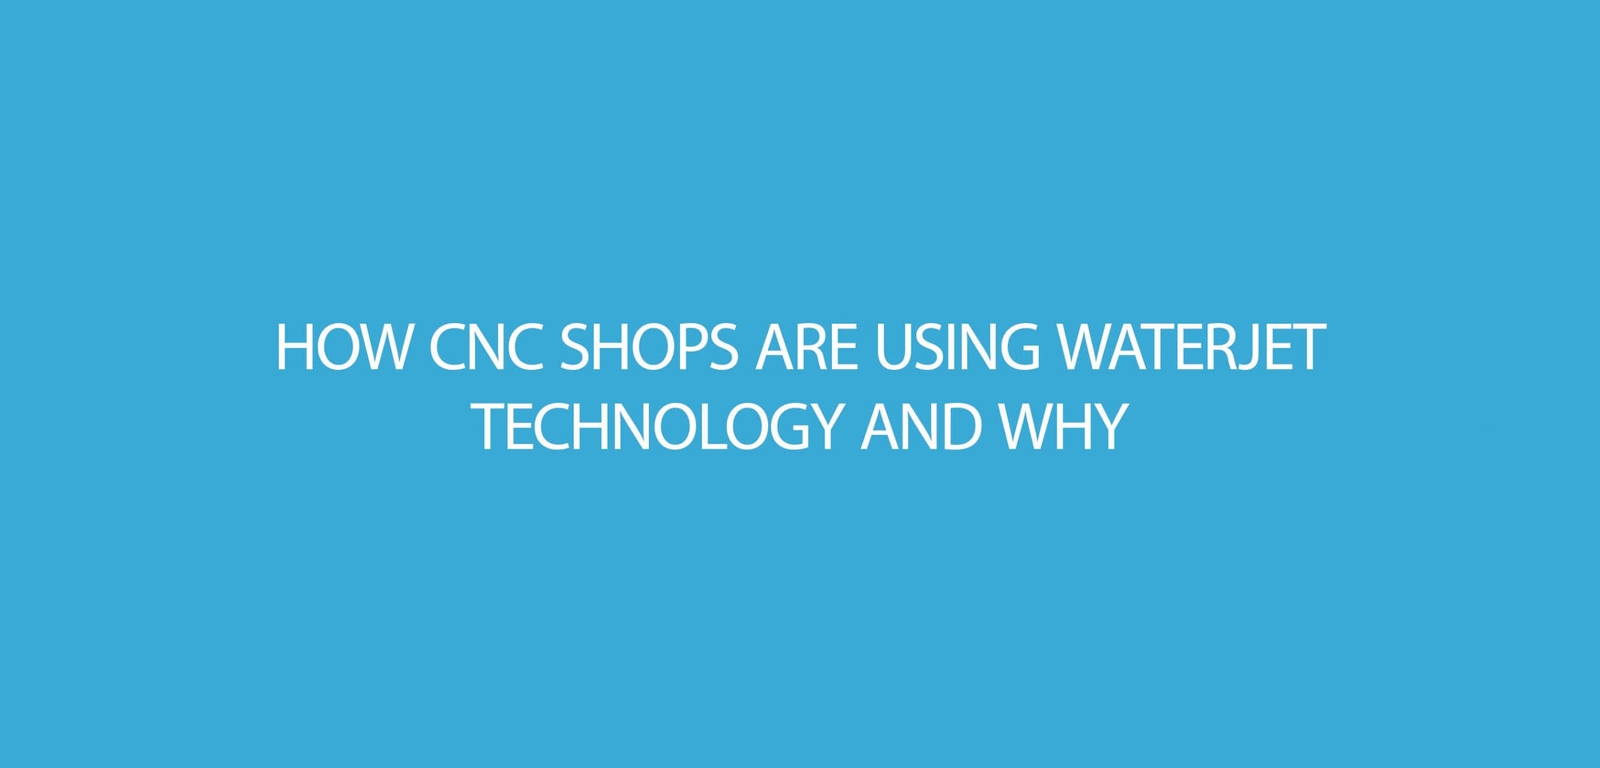 How CNC Shops are using Waterjet Technology and Why